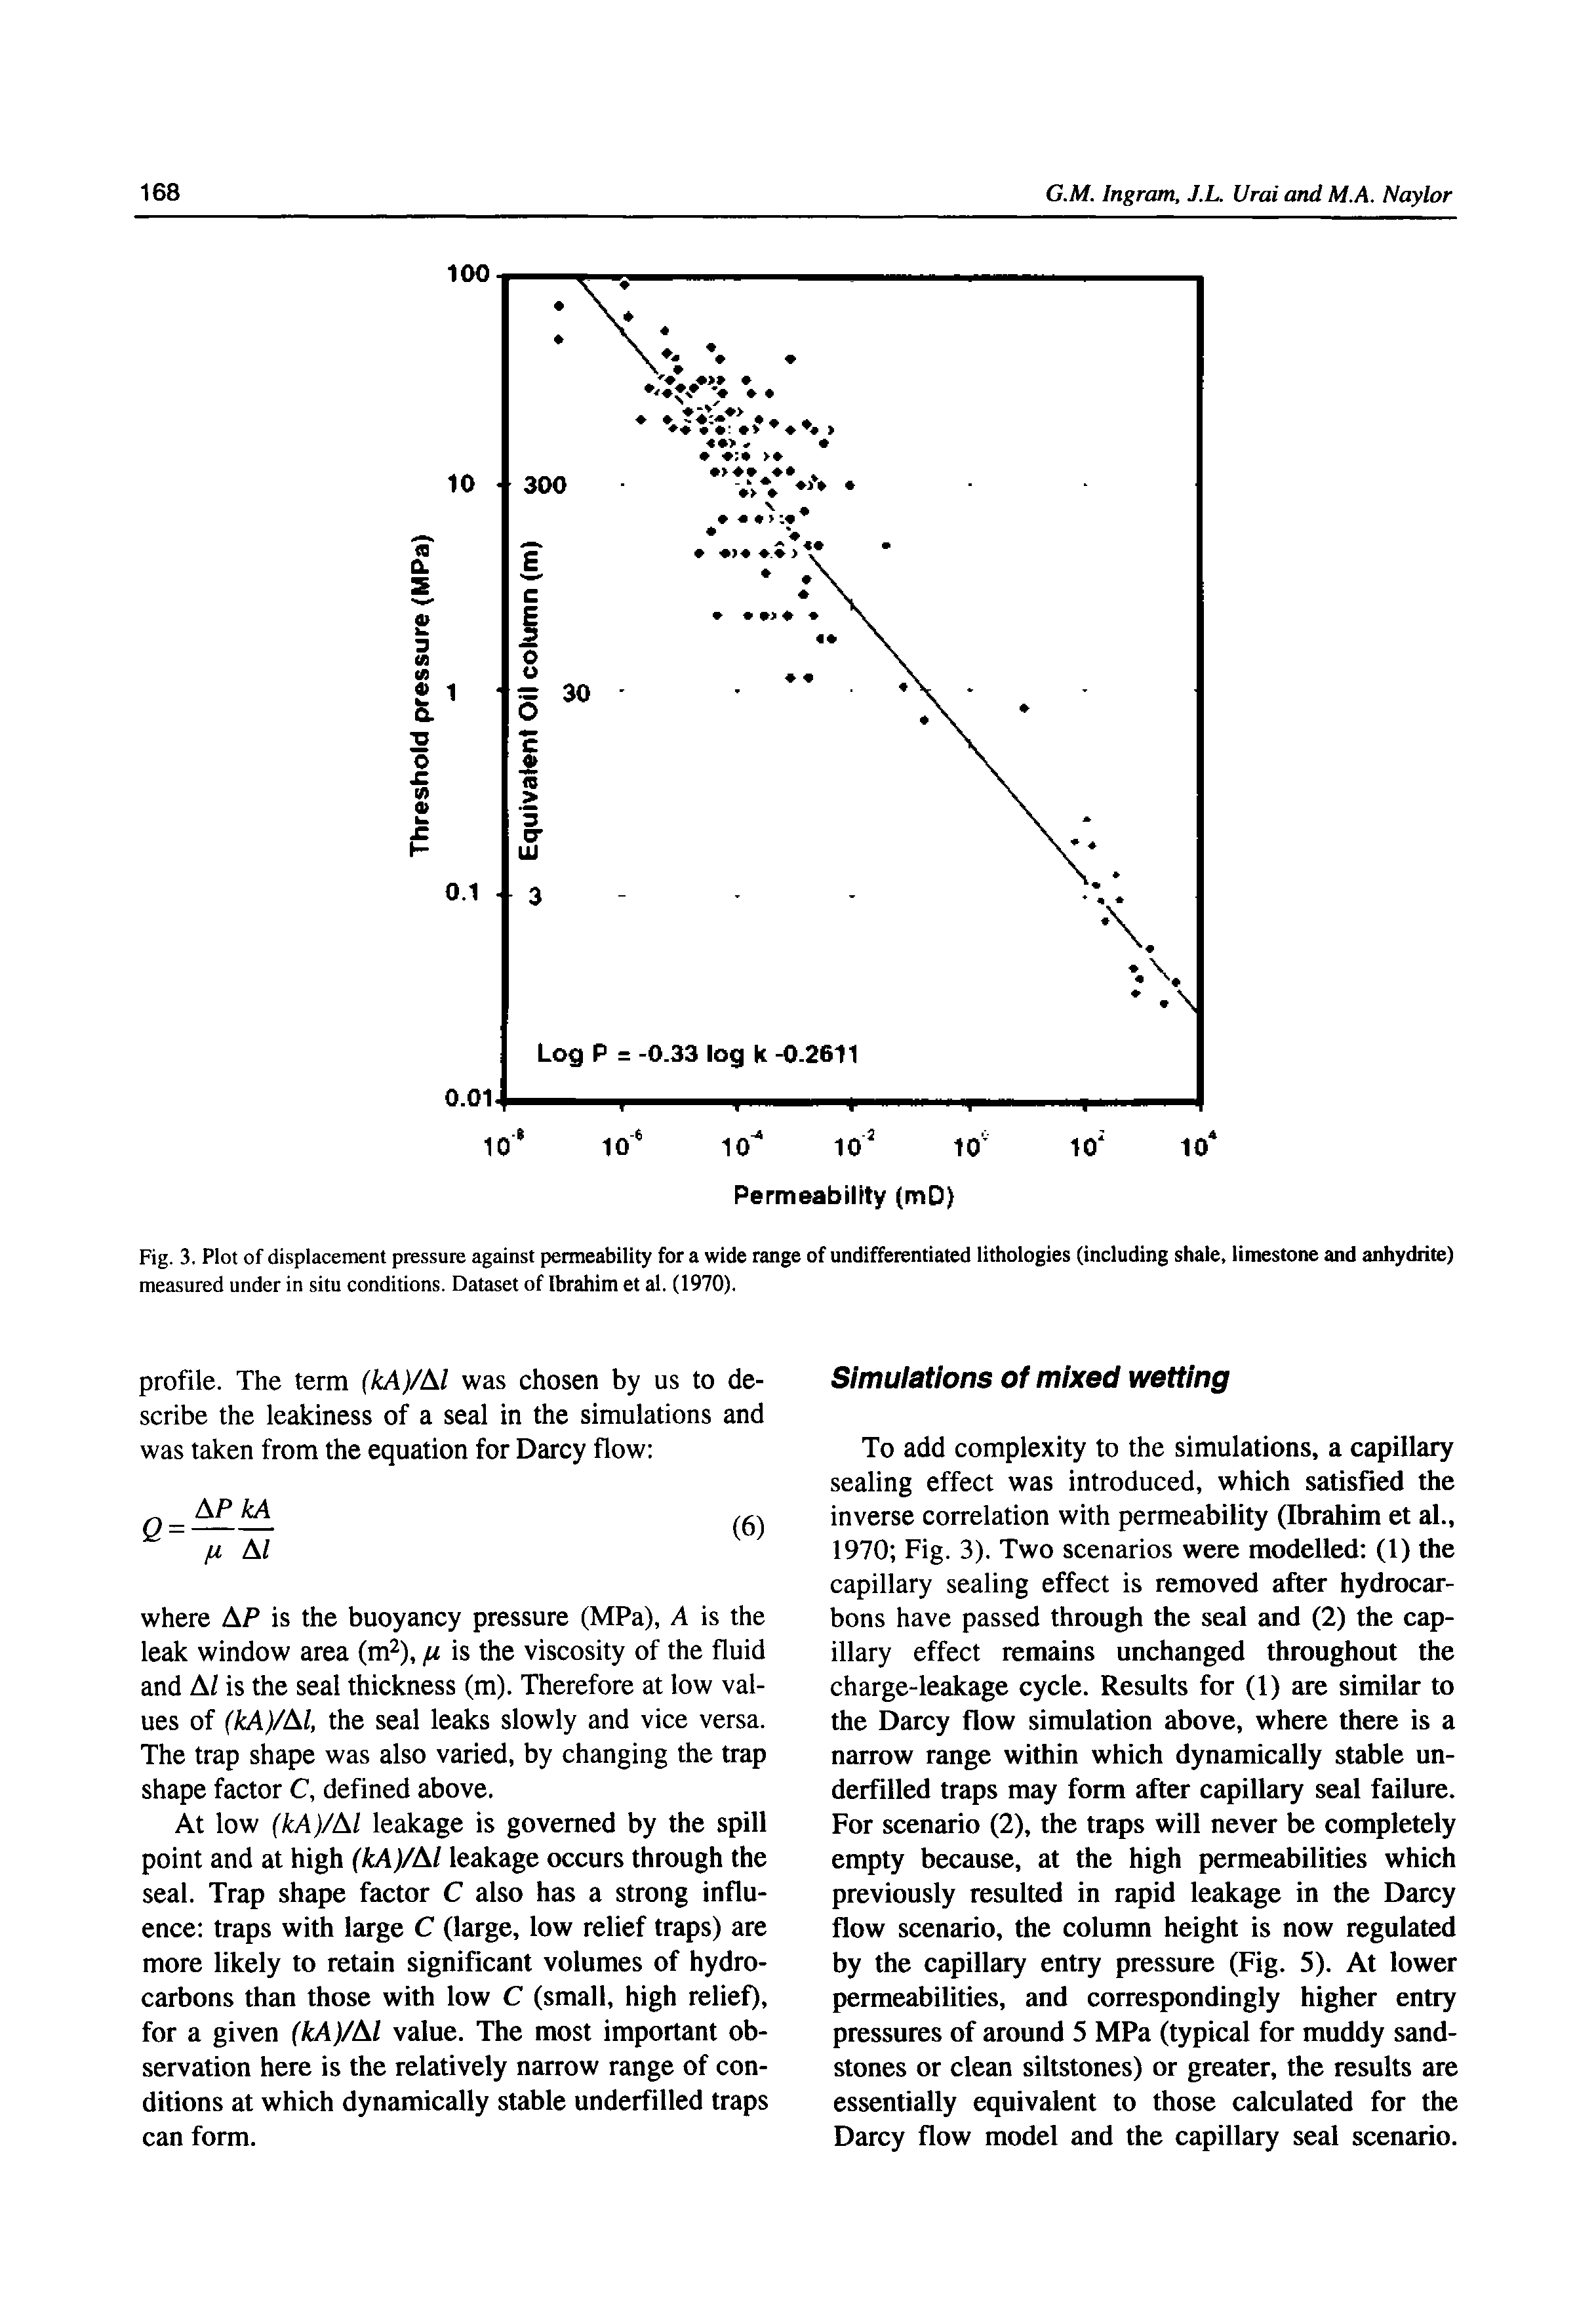 Fig. 3. Plot of displacement pressure against permeability for a wide range of undifferentiated lithologies (including shale, limestone and anhydrite) measured under in situ conditions. Dataset of Ibrahim et al. (1970).